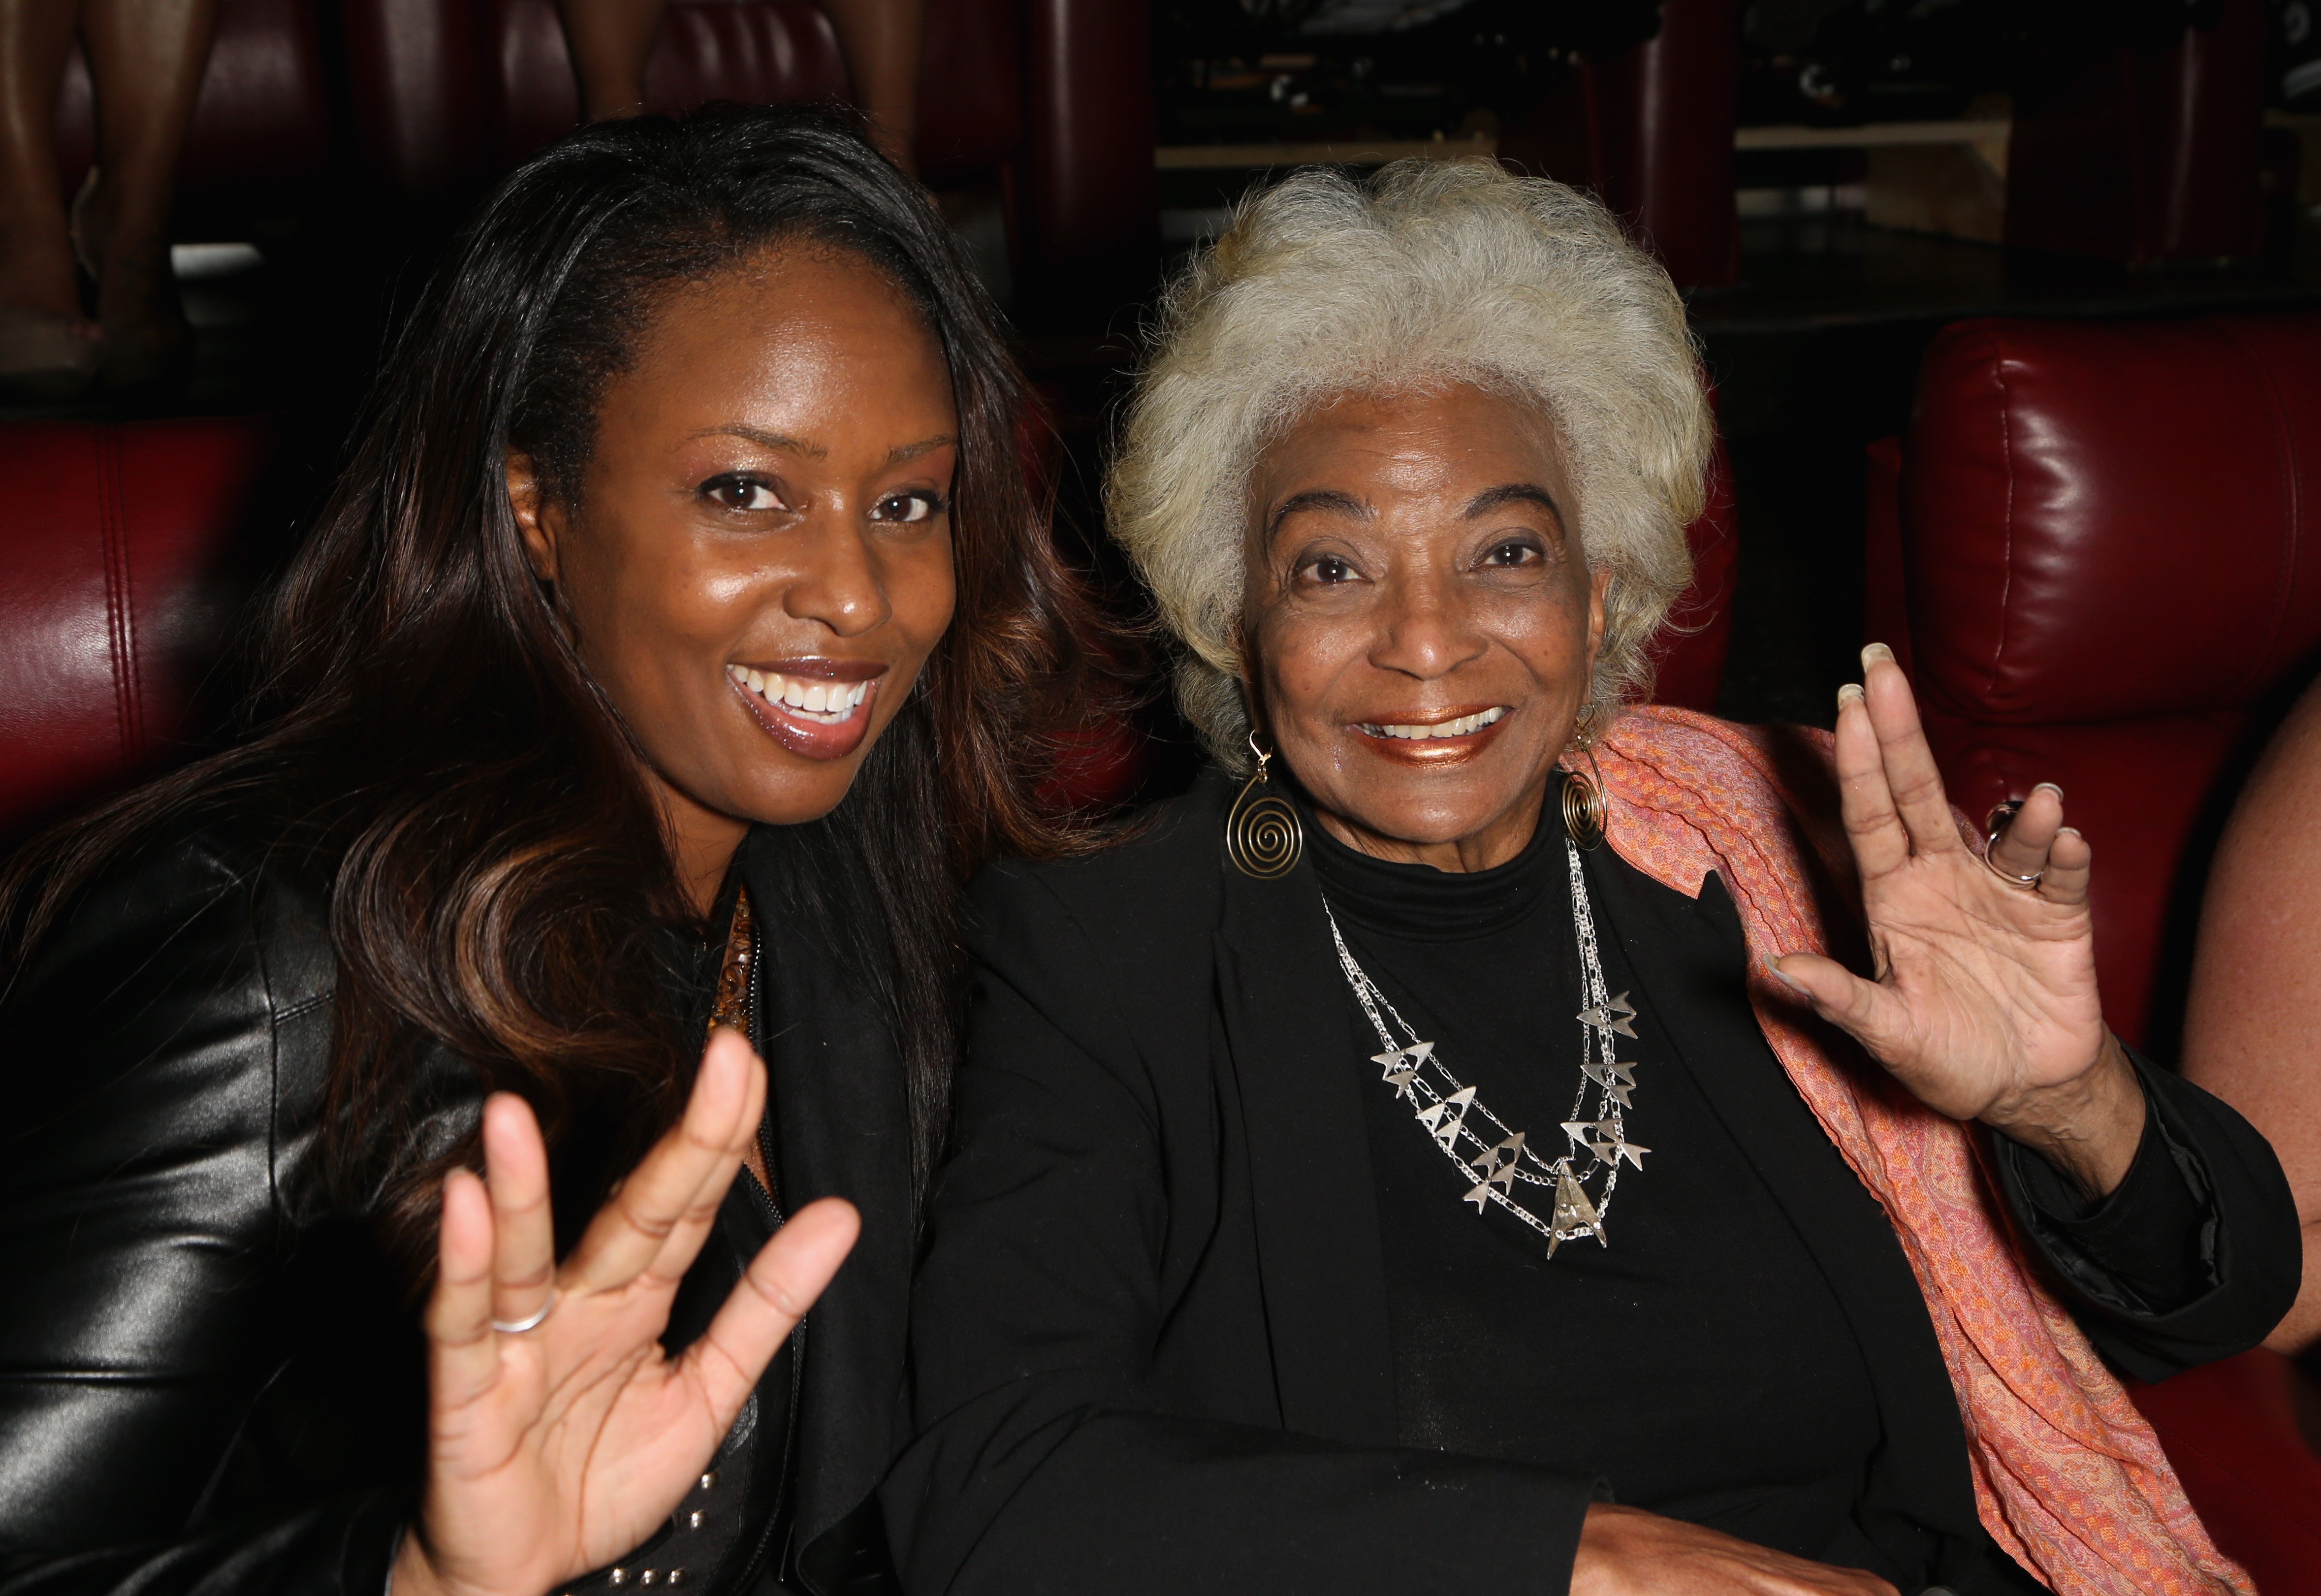  Actress/producer Angelique Fawcette (L) and actress Nichelle Nichols attend a screening of the science fiction spoof film "Unbelievable!!!!!" at the Brenden Theatres inside Palms Casino Resort on August 5, 2017 in Las Vegas, Nevada. | Source: Getty Images 